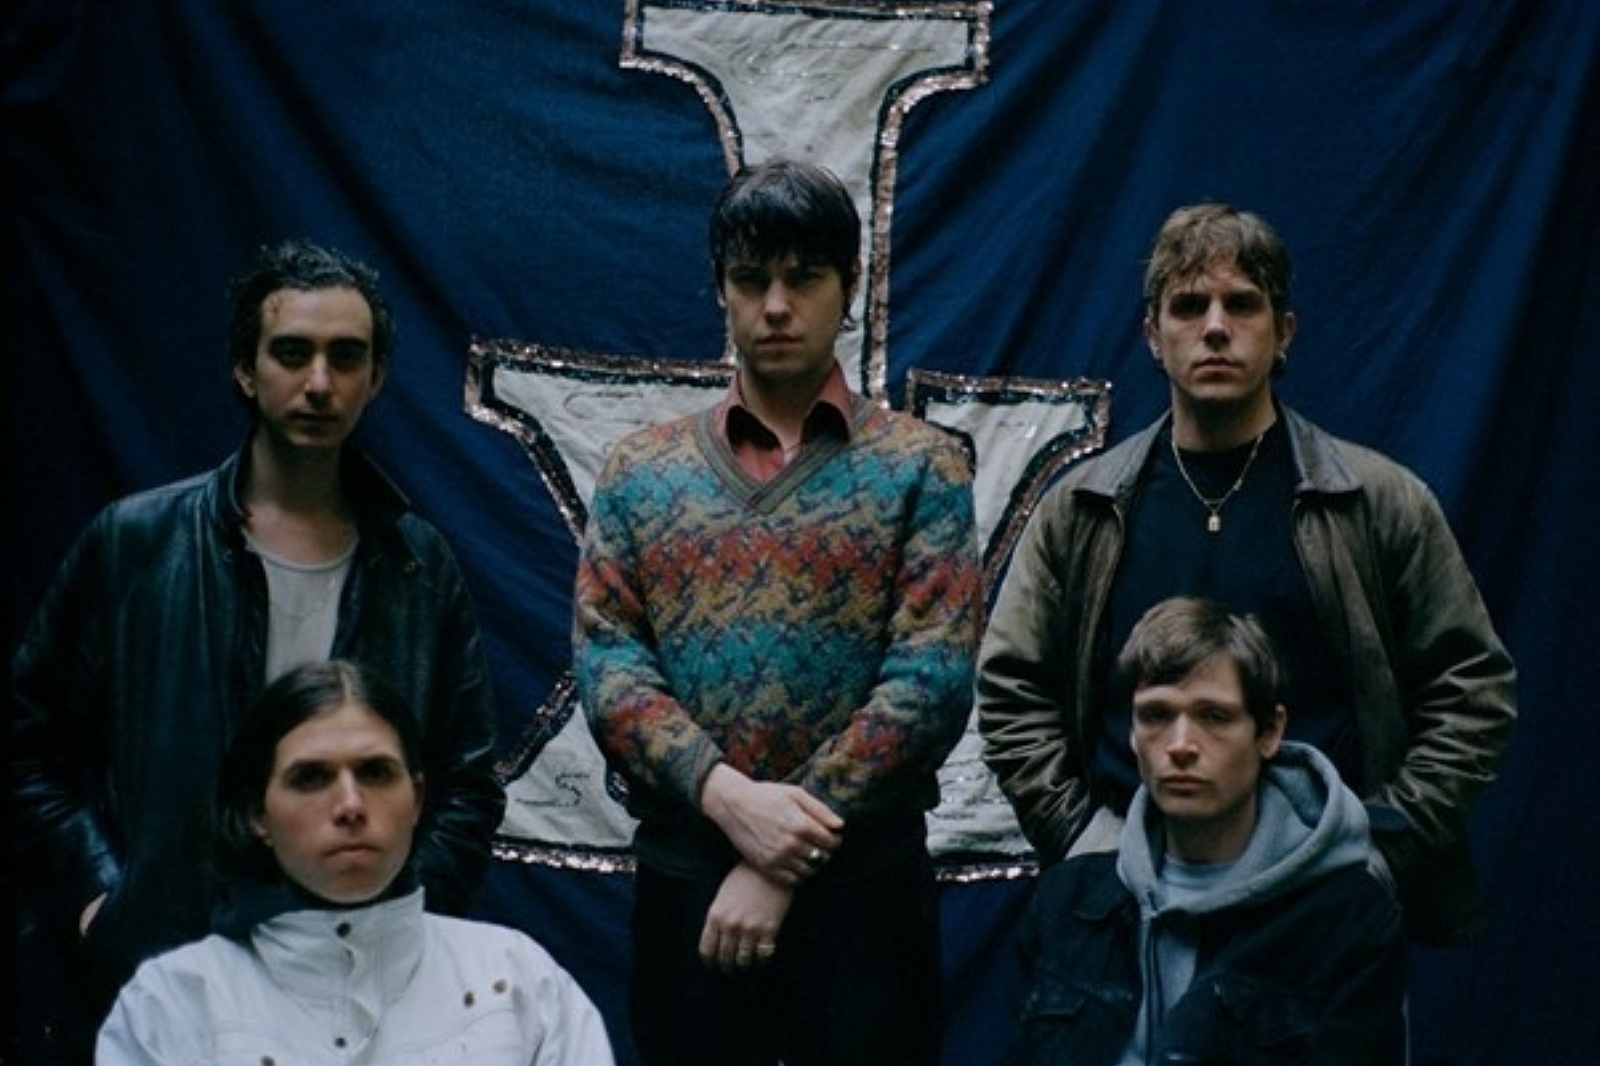 Iceage release new track 'Gold City'